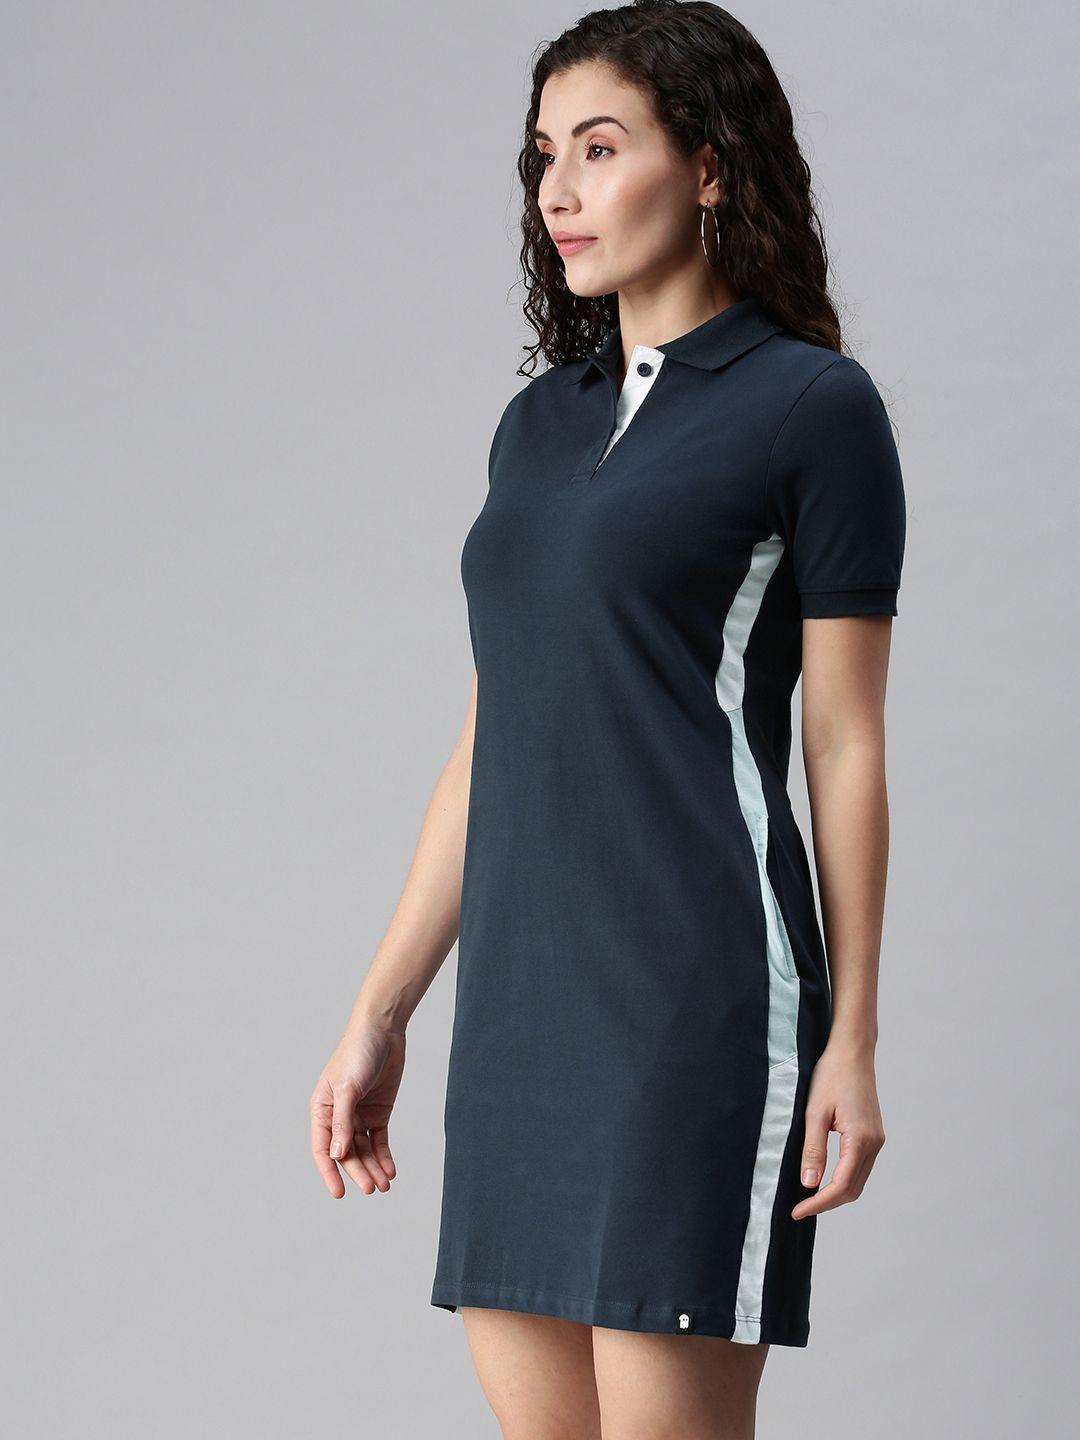 the souled store navy blue polo collar side striped t-shirt dress